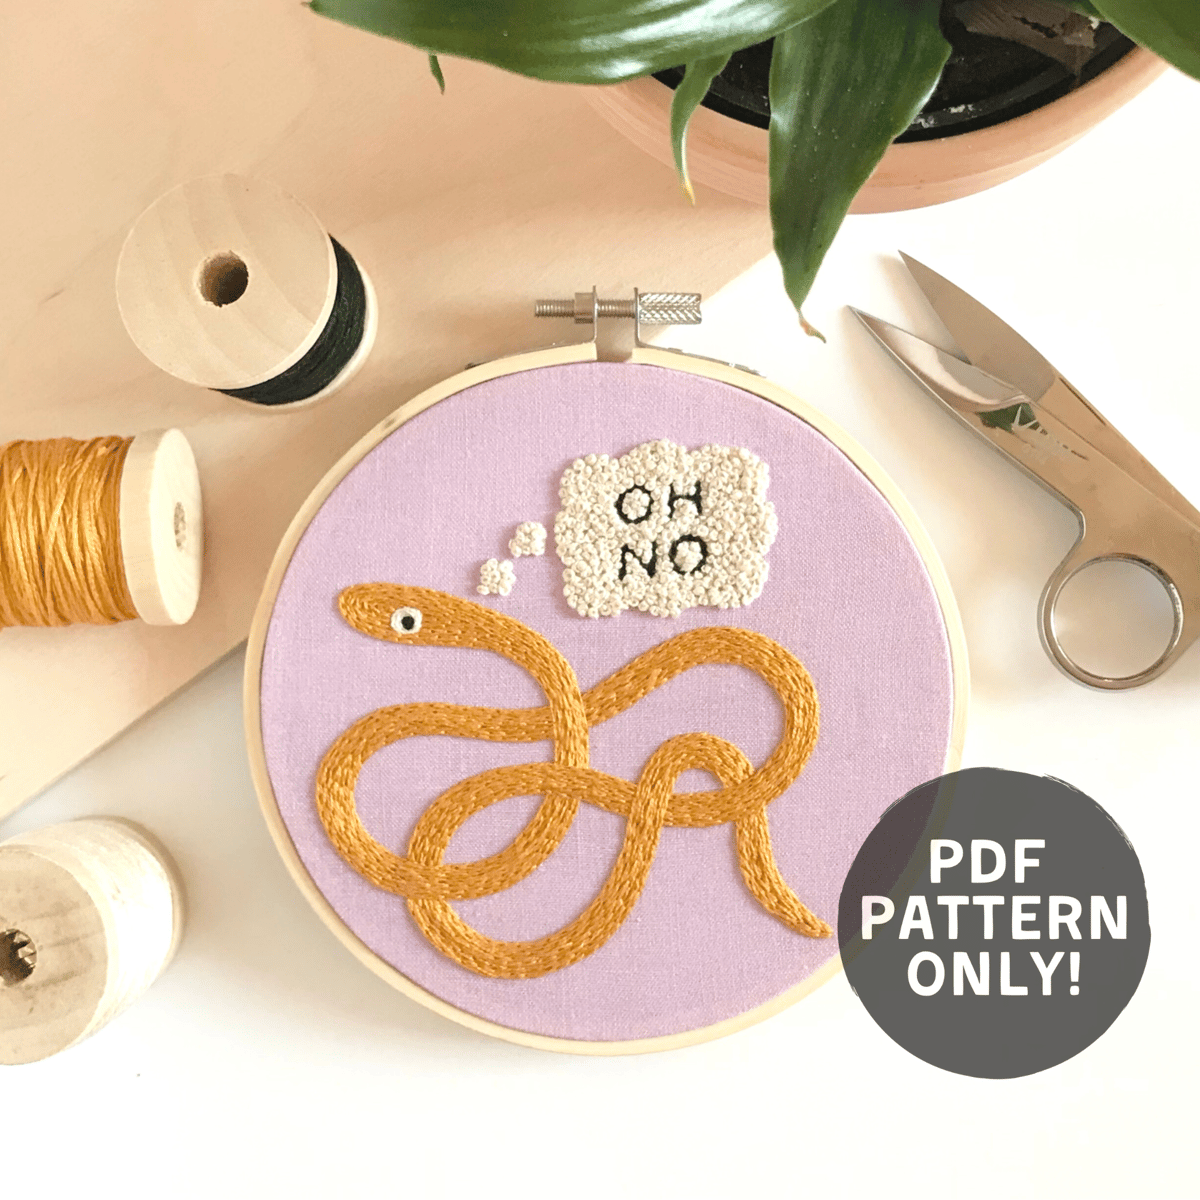 "Oh No" - Hand Embroidery PDF PATTERN - Pattern ONLY!